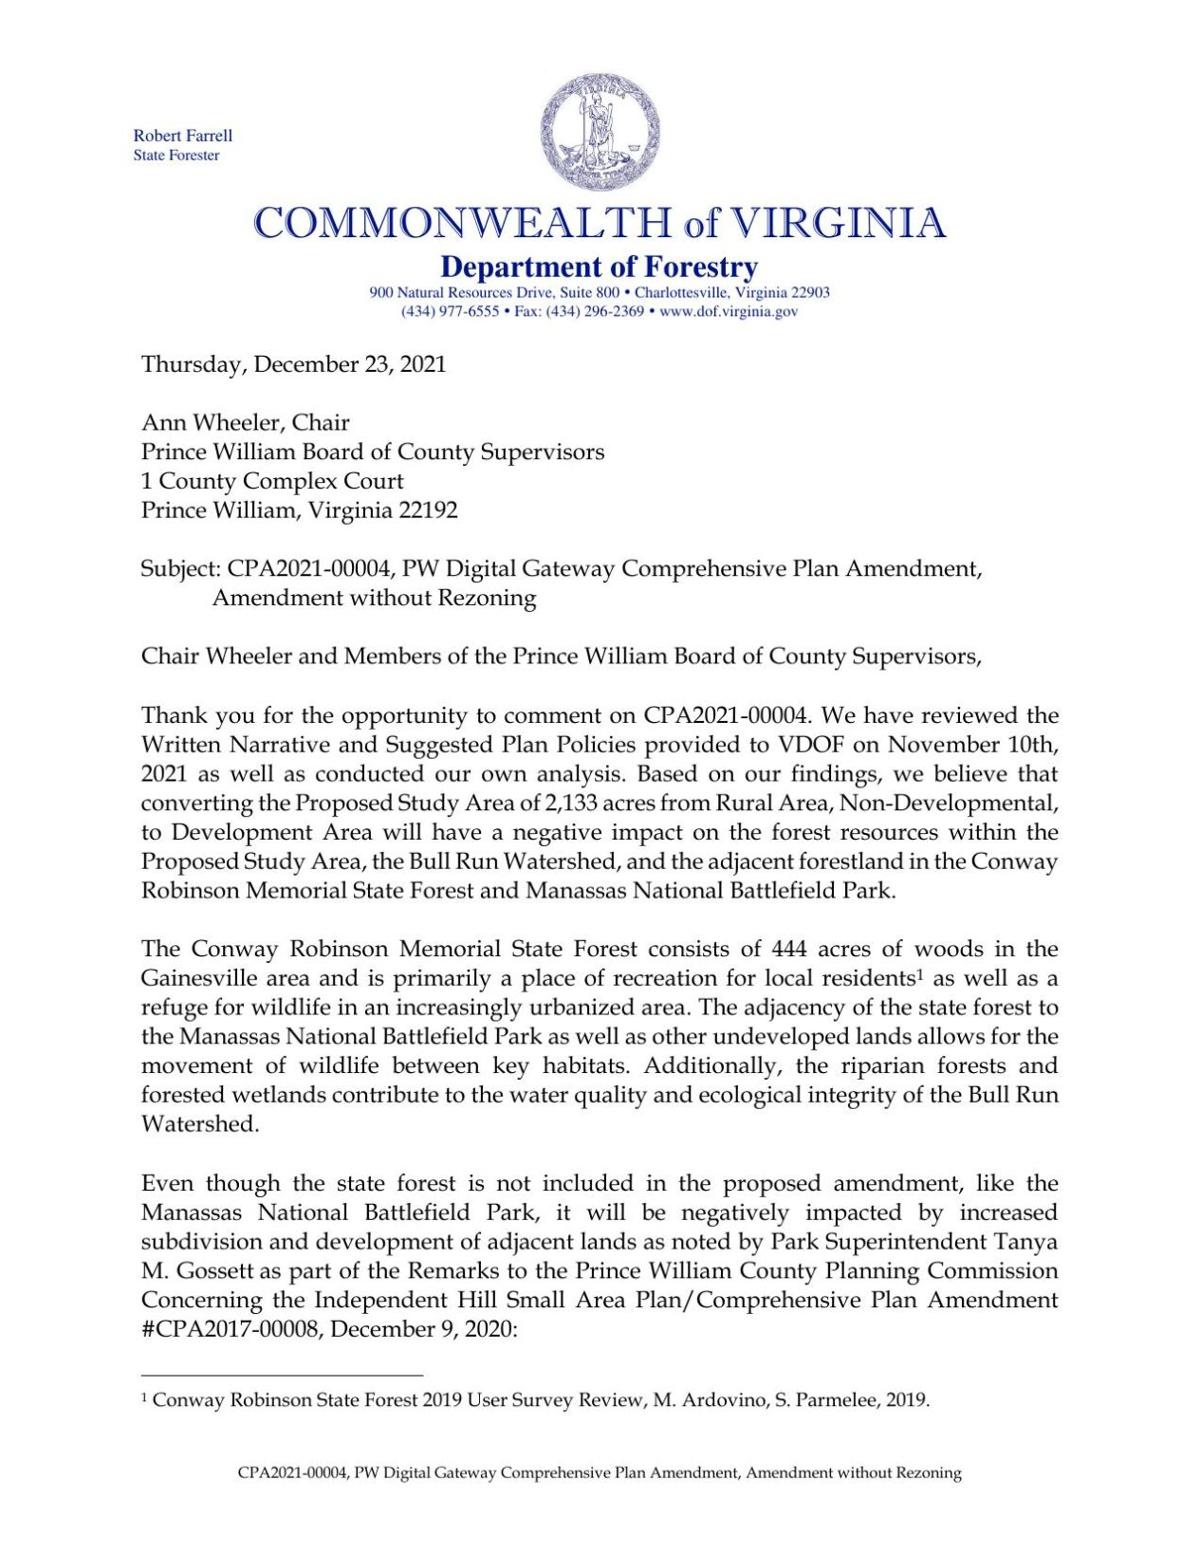 Letter from Virginia Department of Forestry about data center proposal